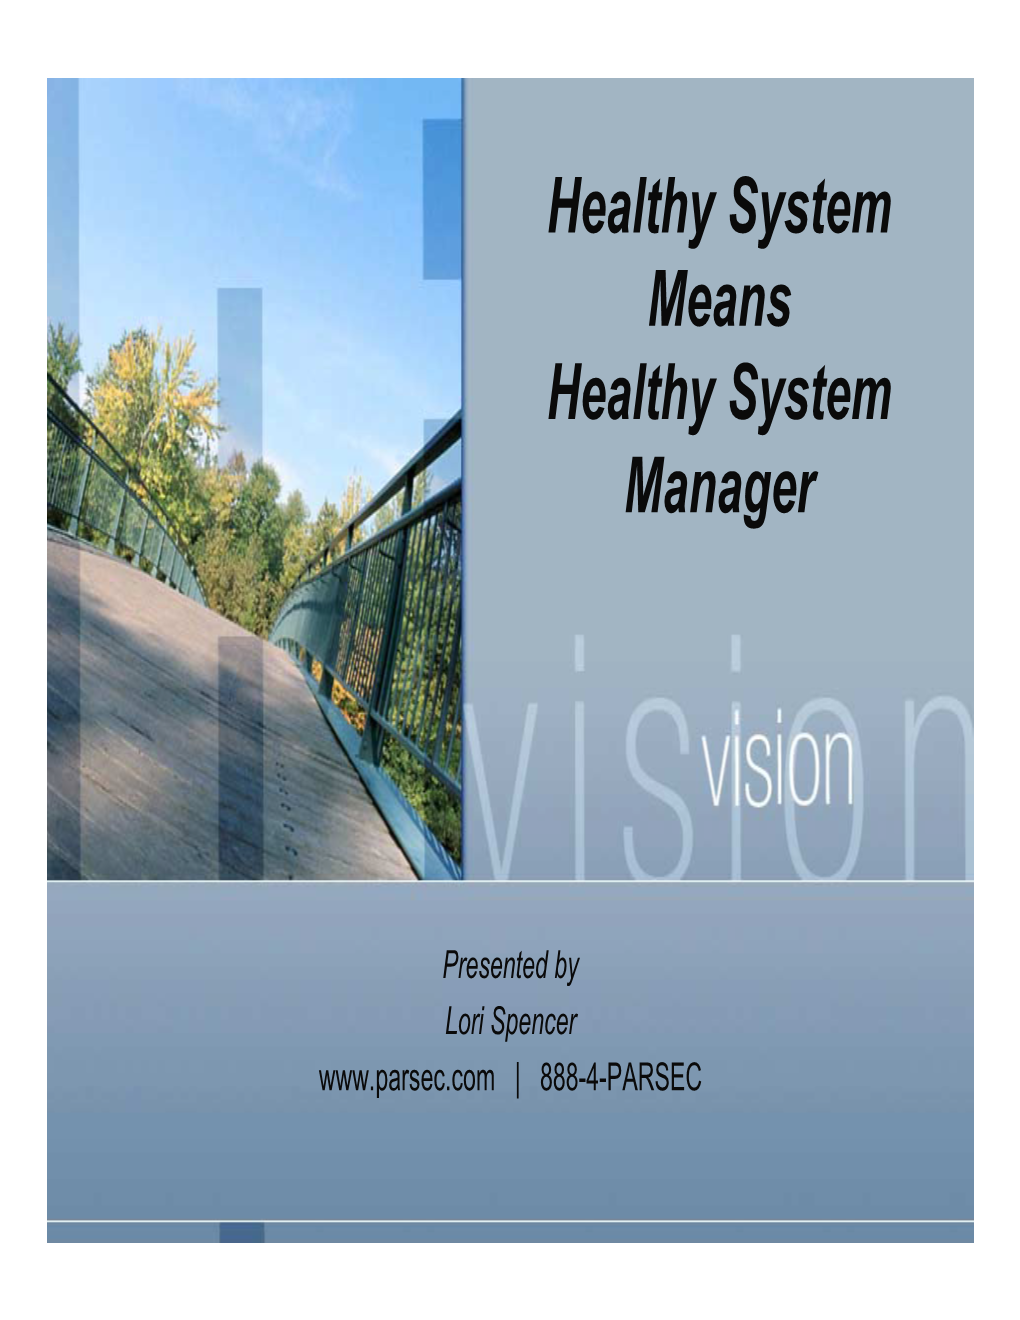 Healthy System Means Healthy System Manager